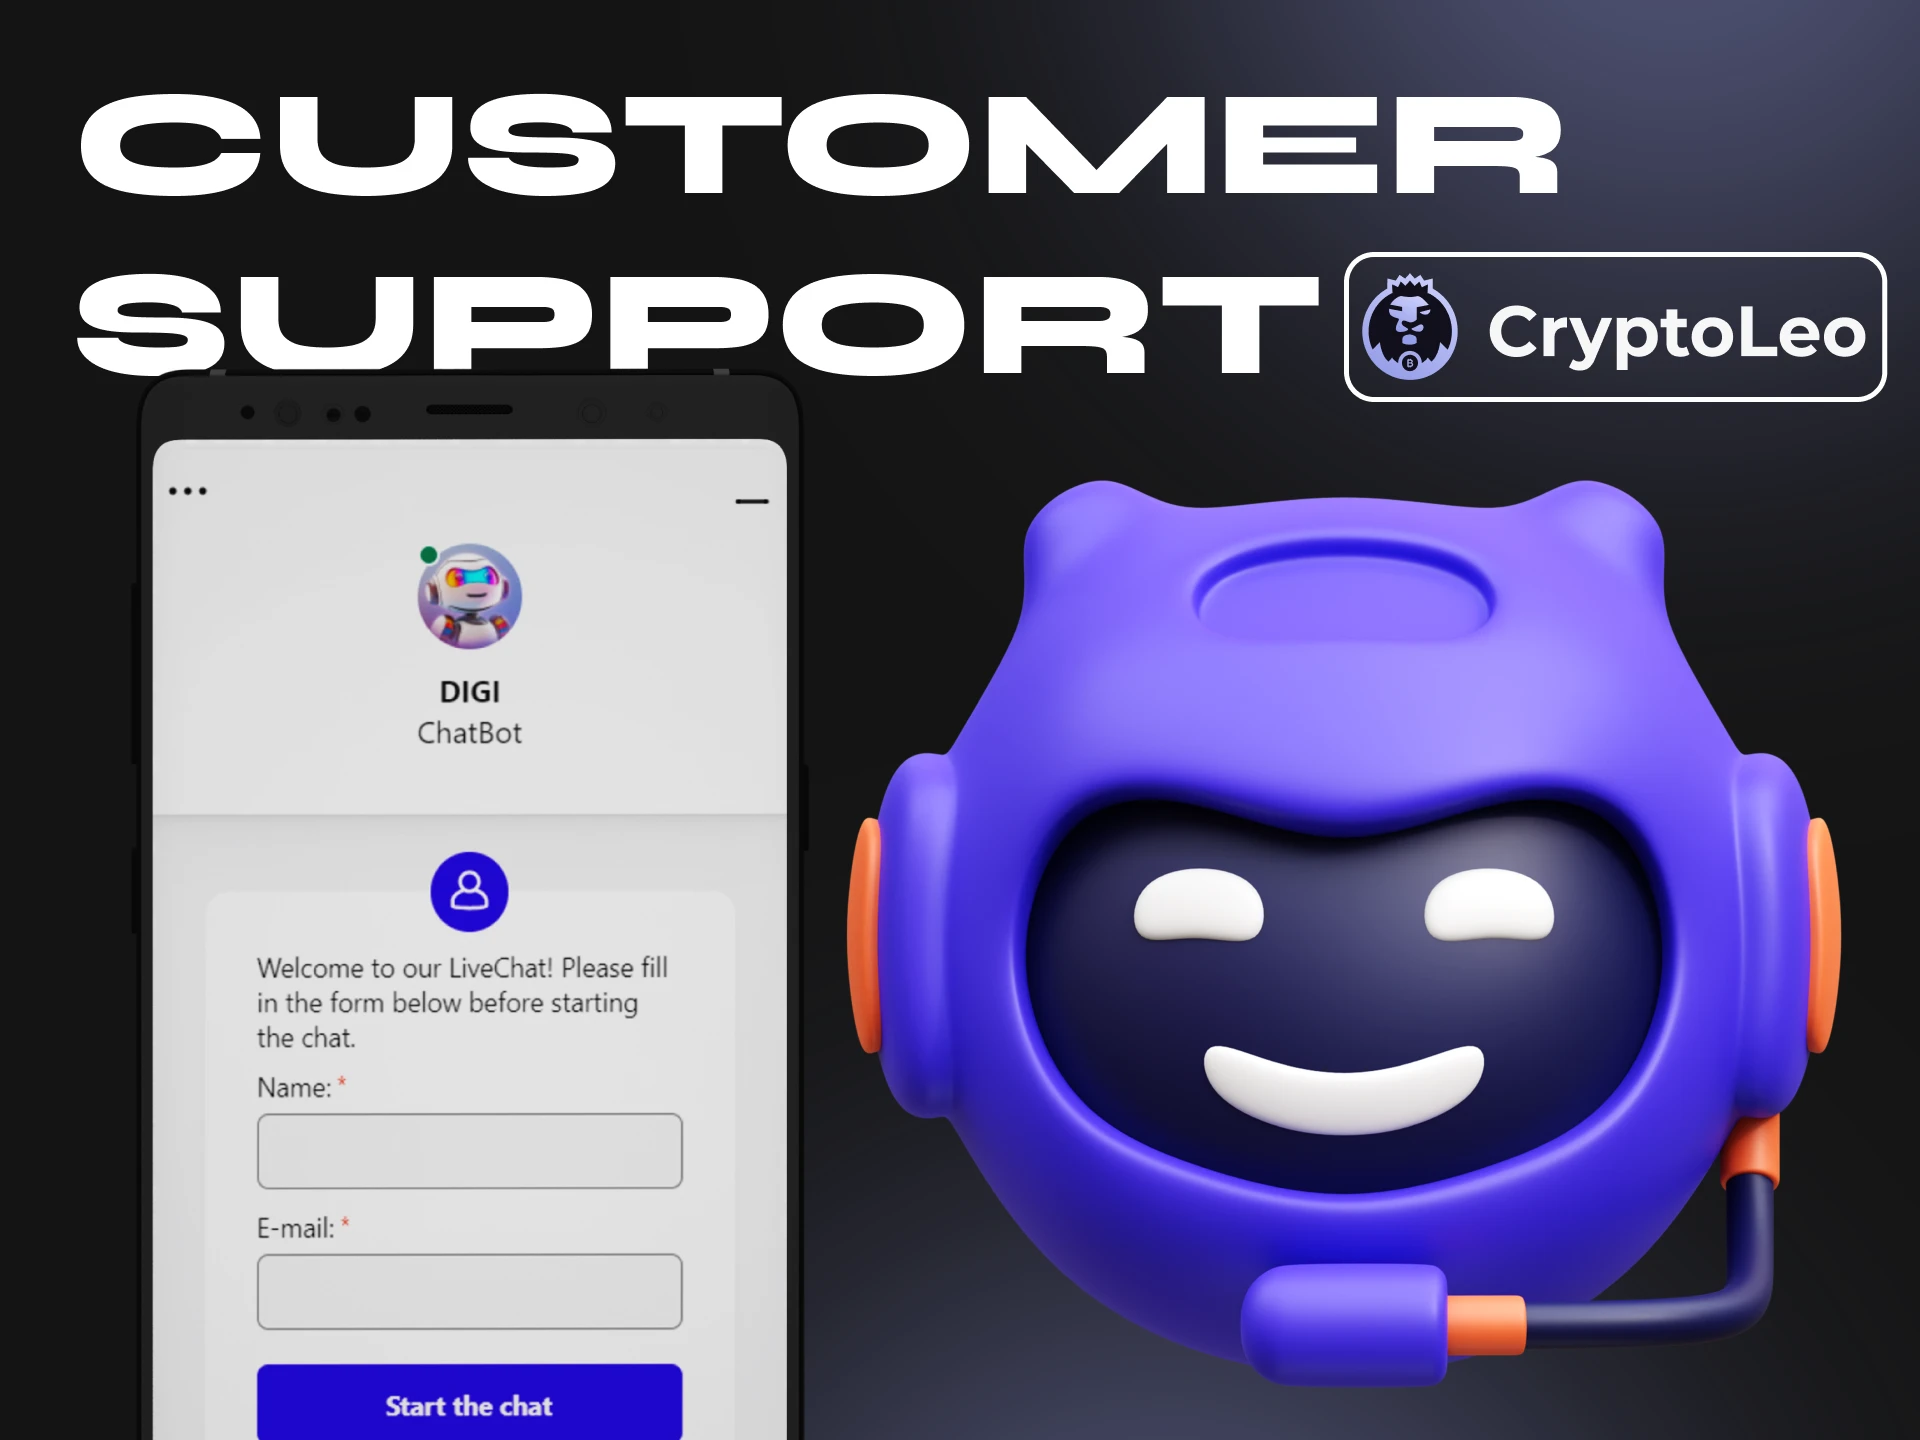 If you have any problems with the Cryptoleo app, you can contact their support team using the following methods.